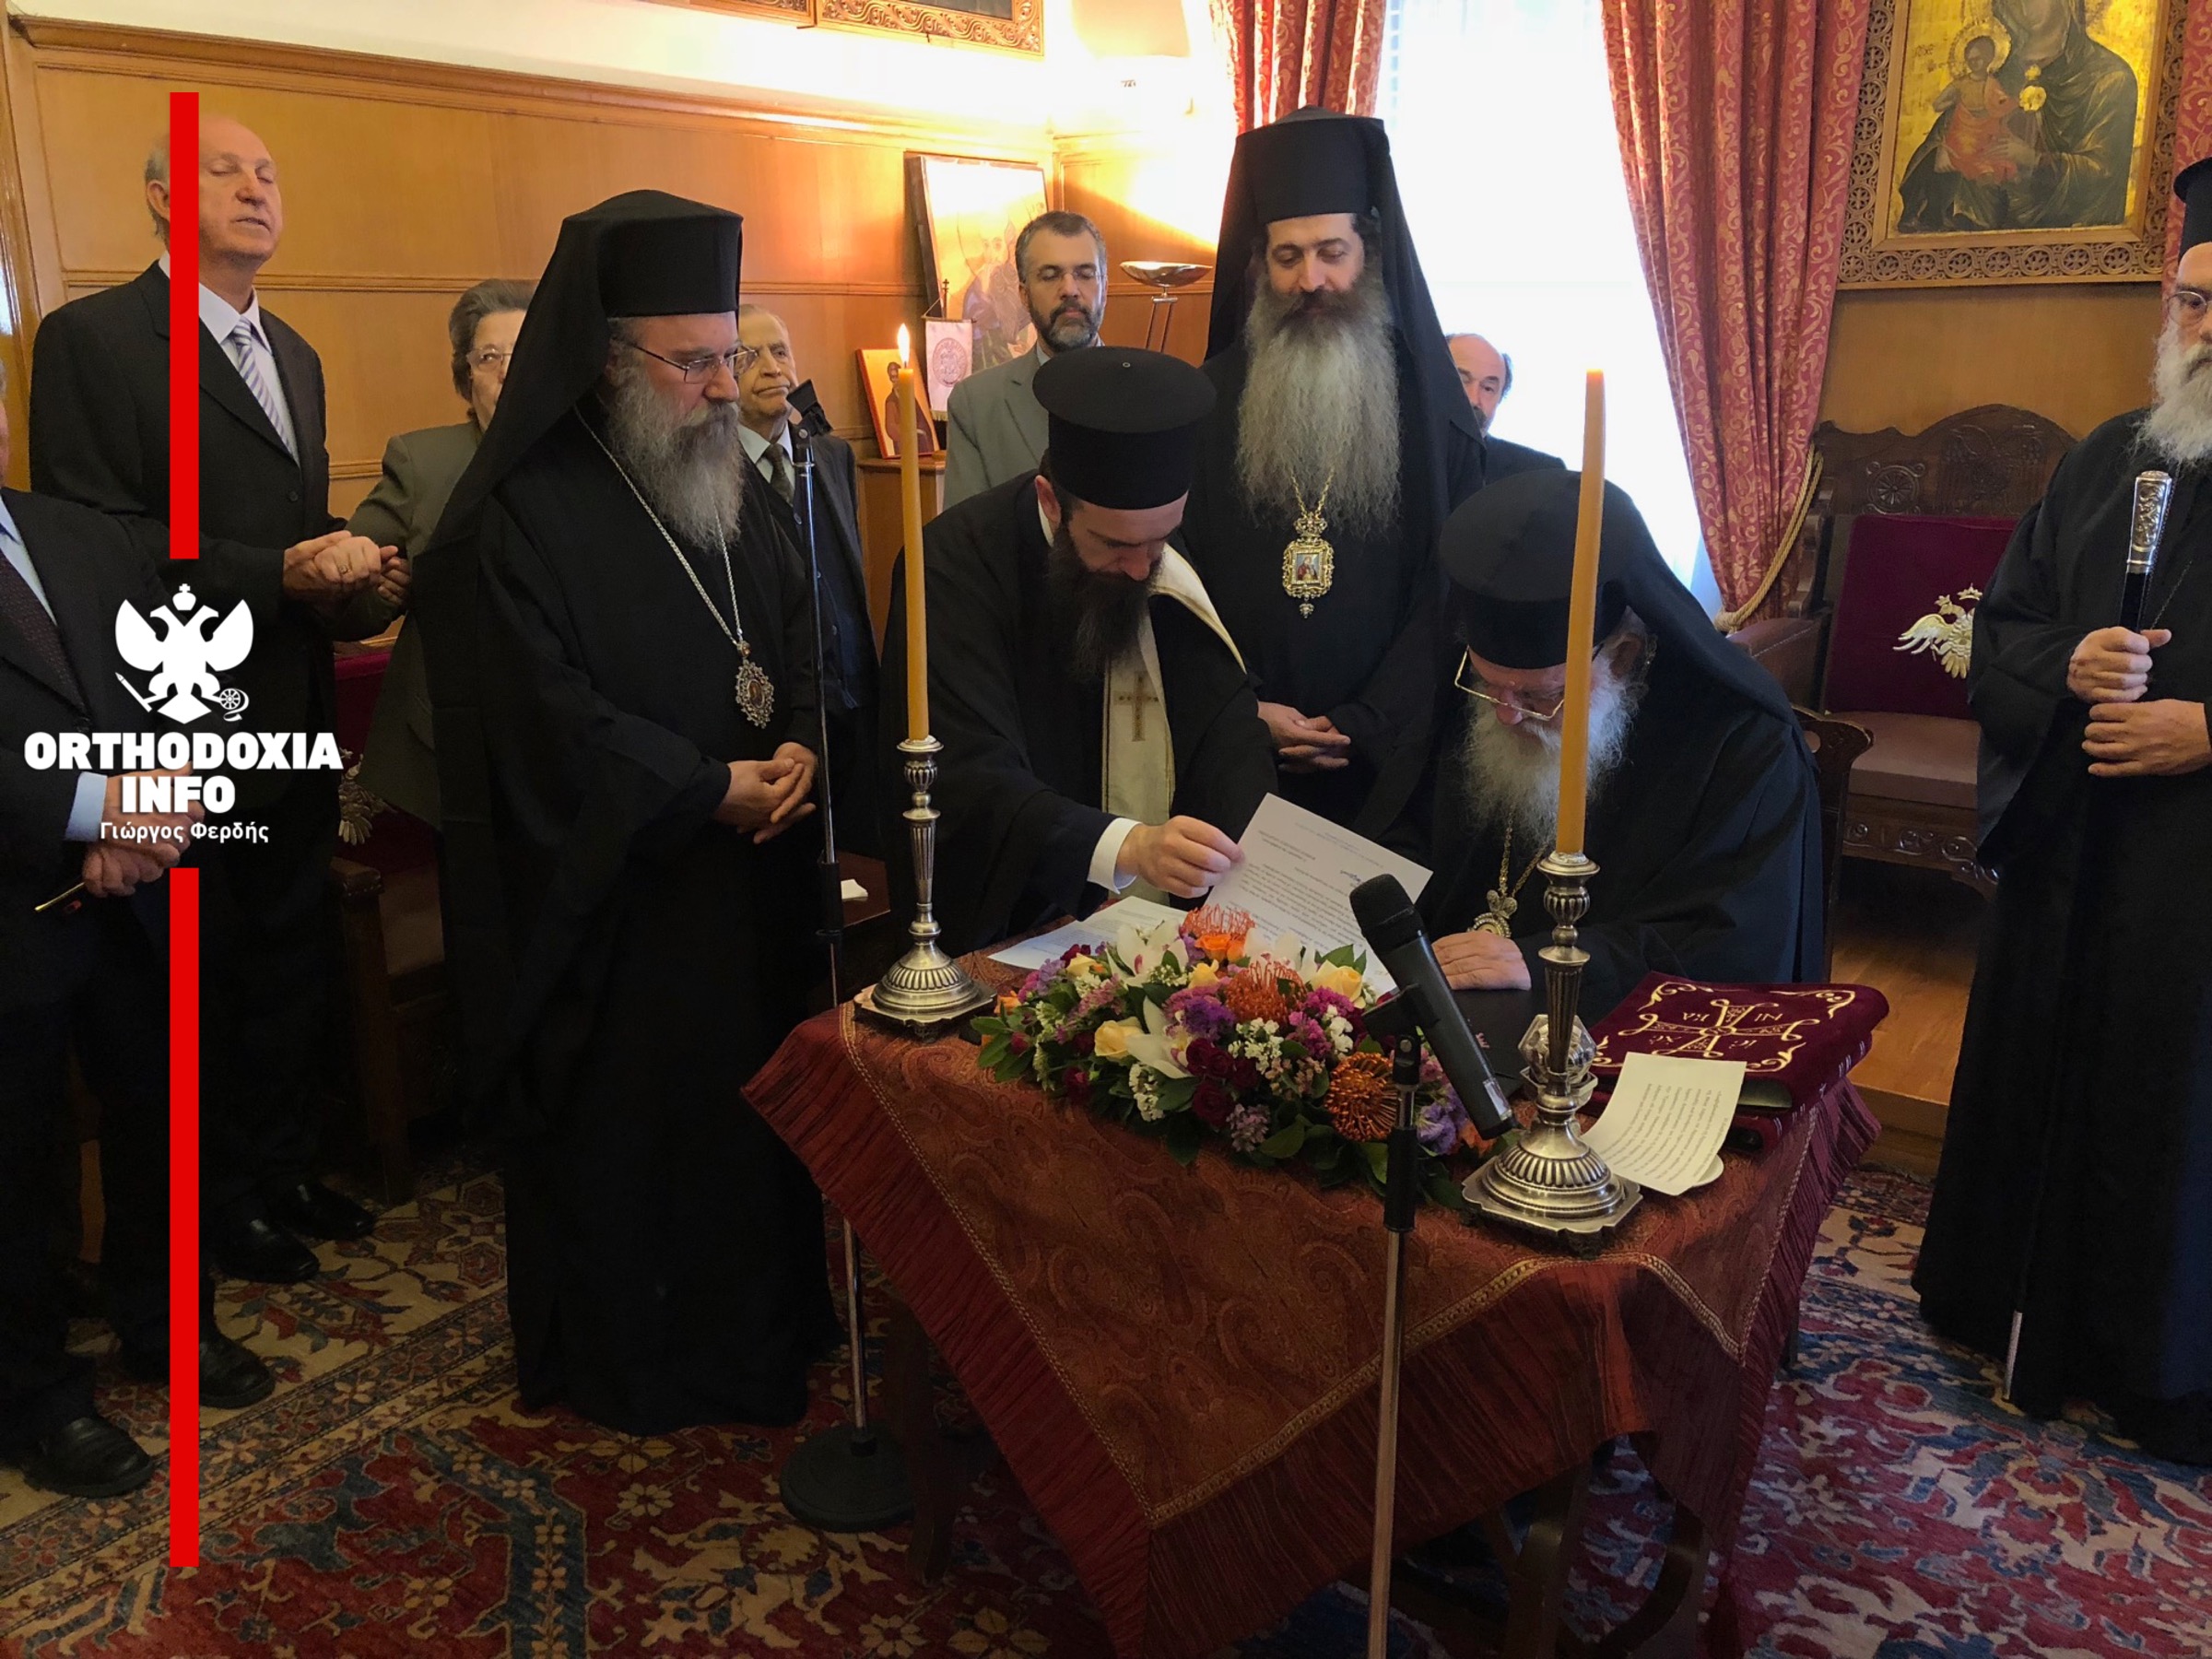 https://orthodoxia.info/news/wp-content/uploads/2018/03/dieveveoseis_voithon_2.jpg